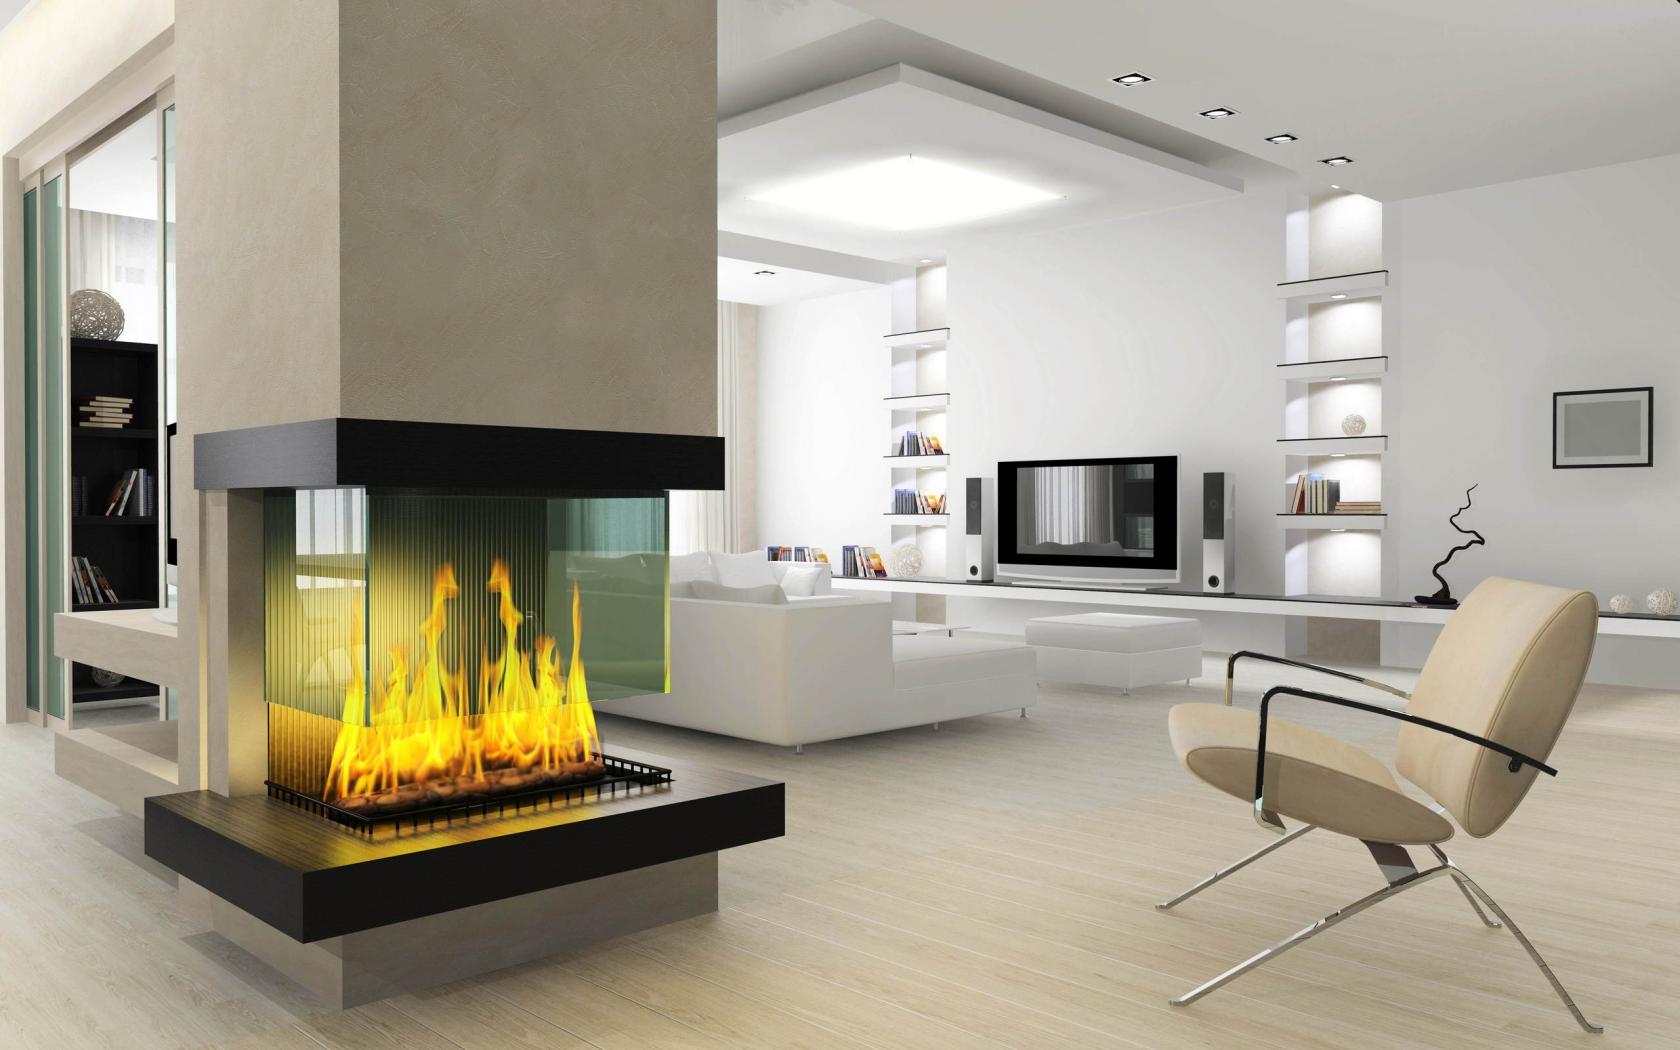 5 Ways to Make Fireplaces the Star of Your Home Interior